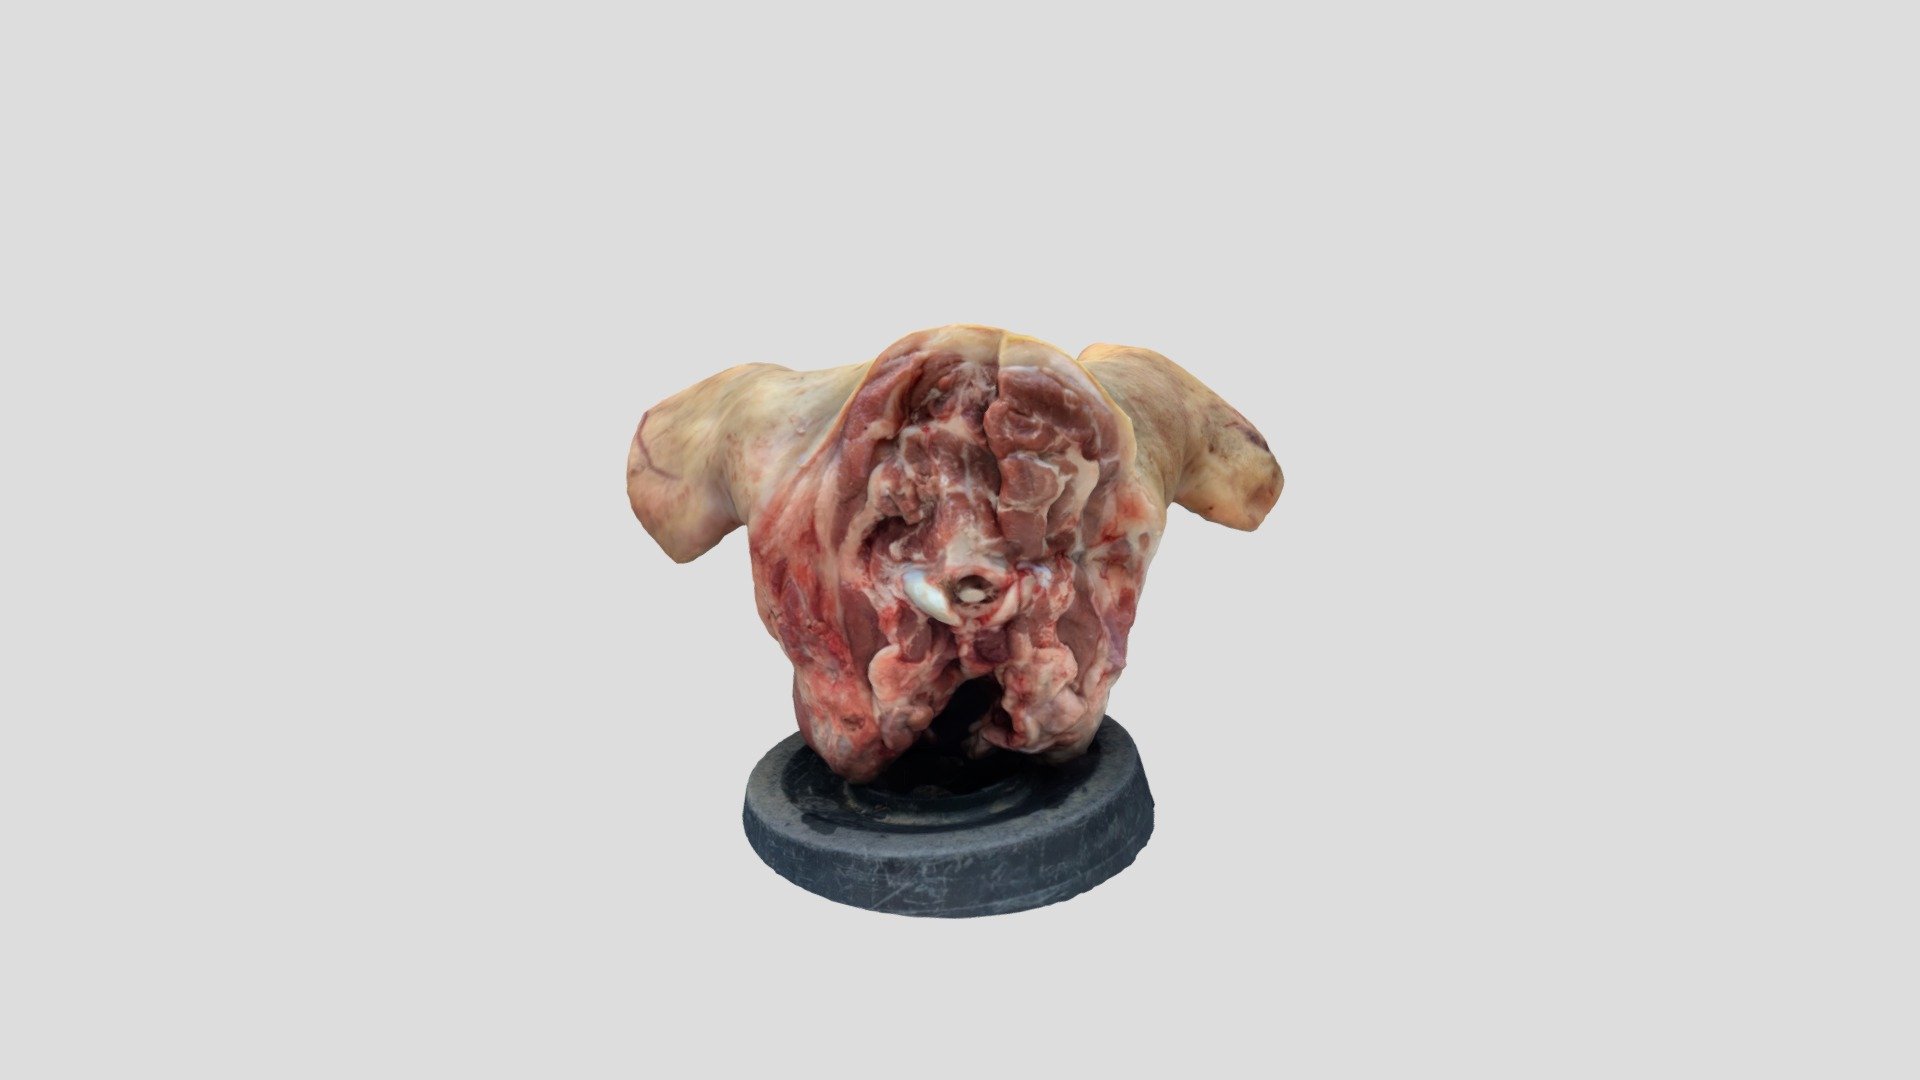 My friends gave me this pig head as a gift for my 25 birthday party 

Created with Polycam - Birthday gift (pig head) - 3D model by cucuchery 3d model